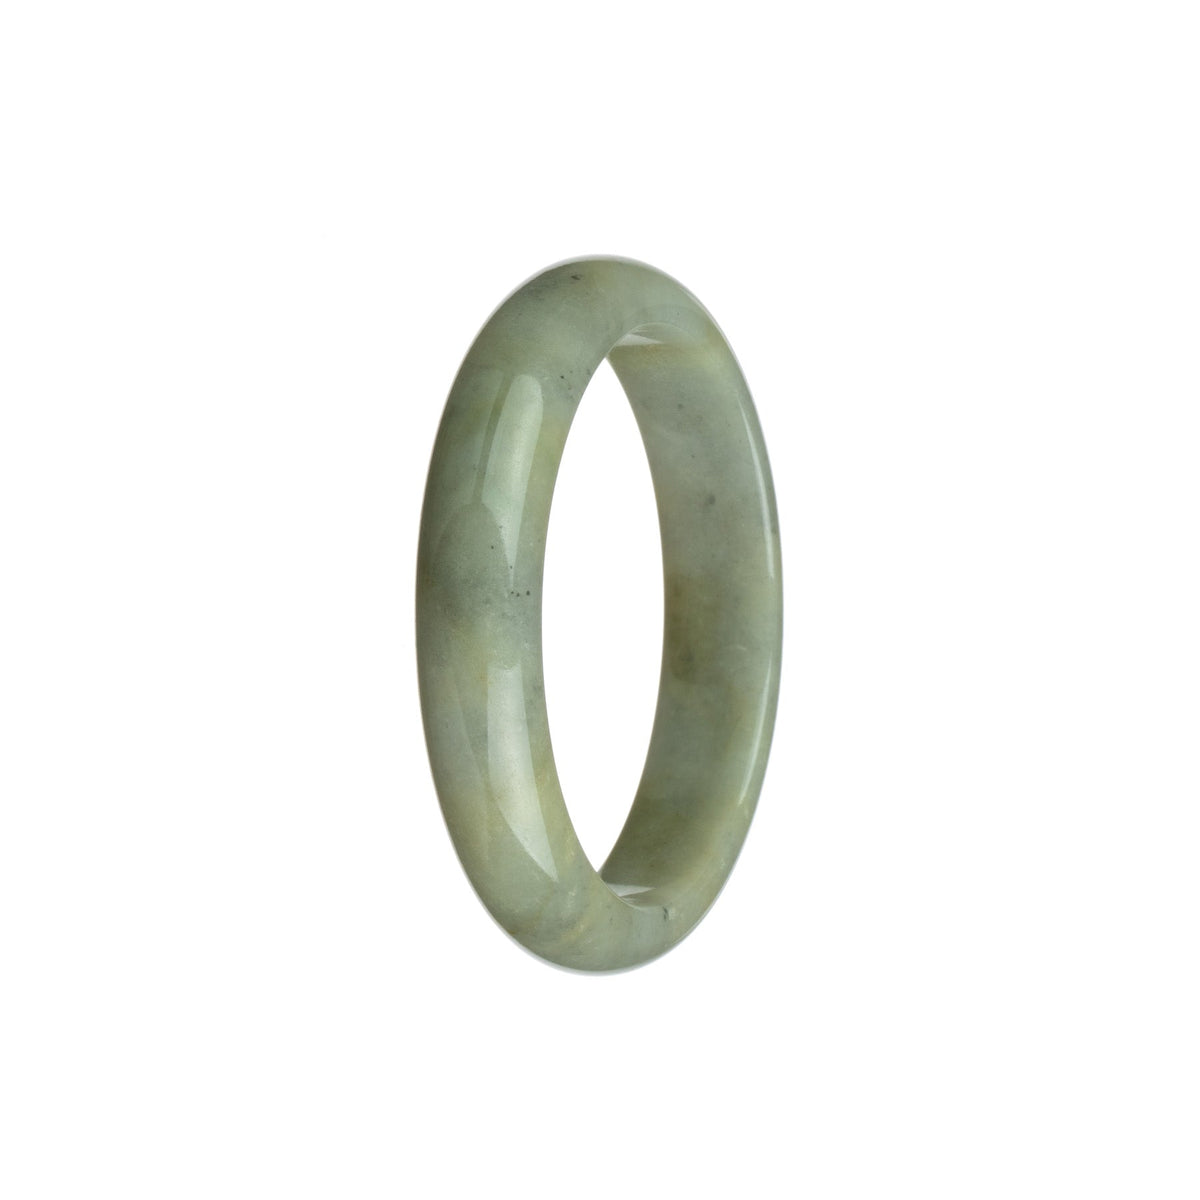 A close-up image of a stunning grey and white jade bangle bracelet with a half moon shape, measuring 54mm in size. The bracelet is made from high-quality Grade A jadeite jade and is designed by MAYS.